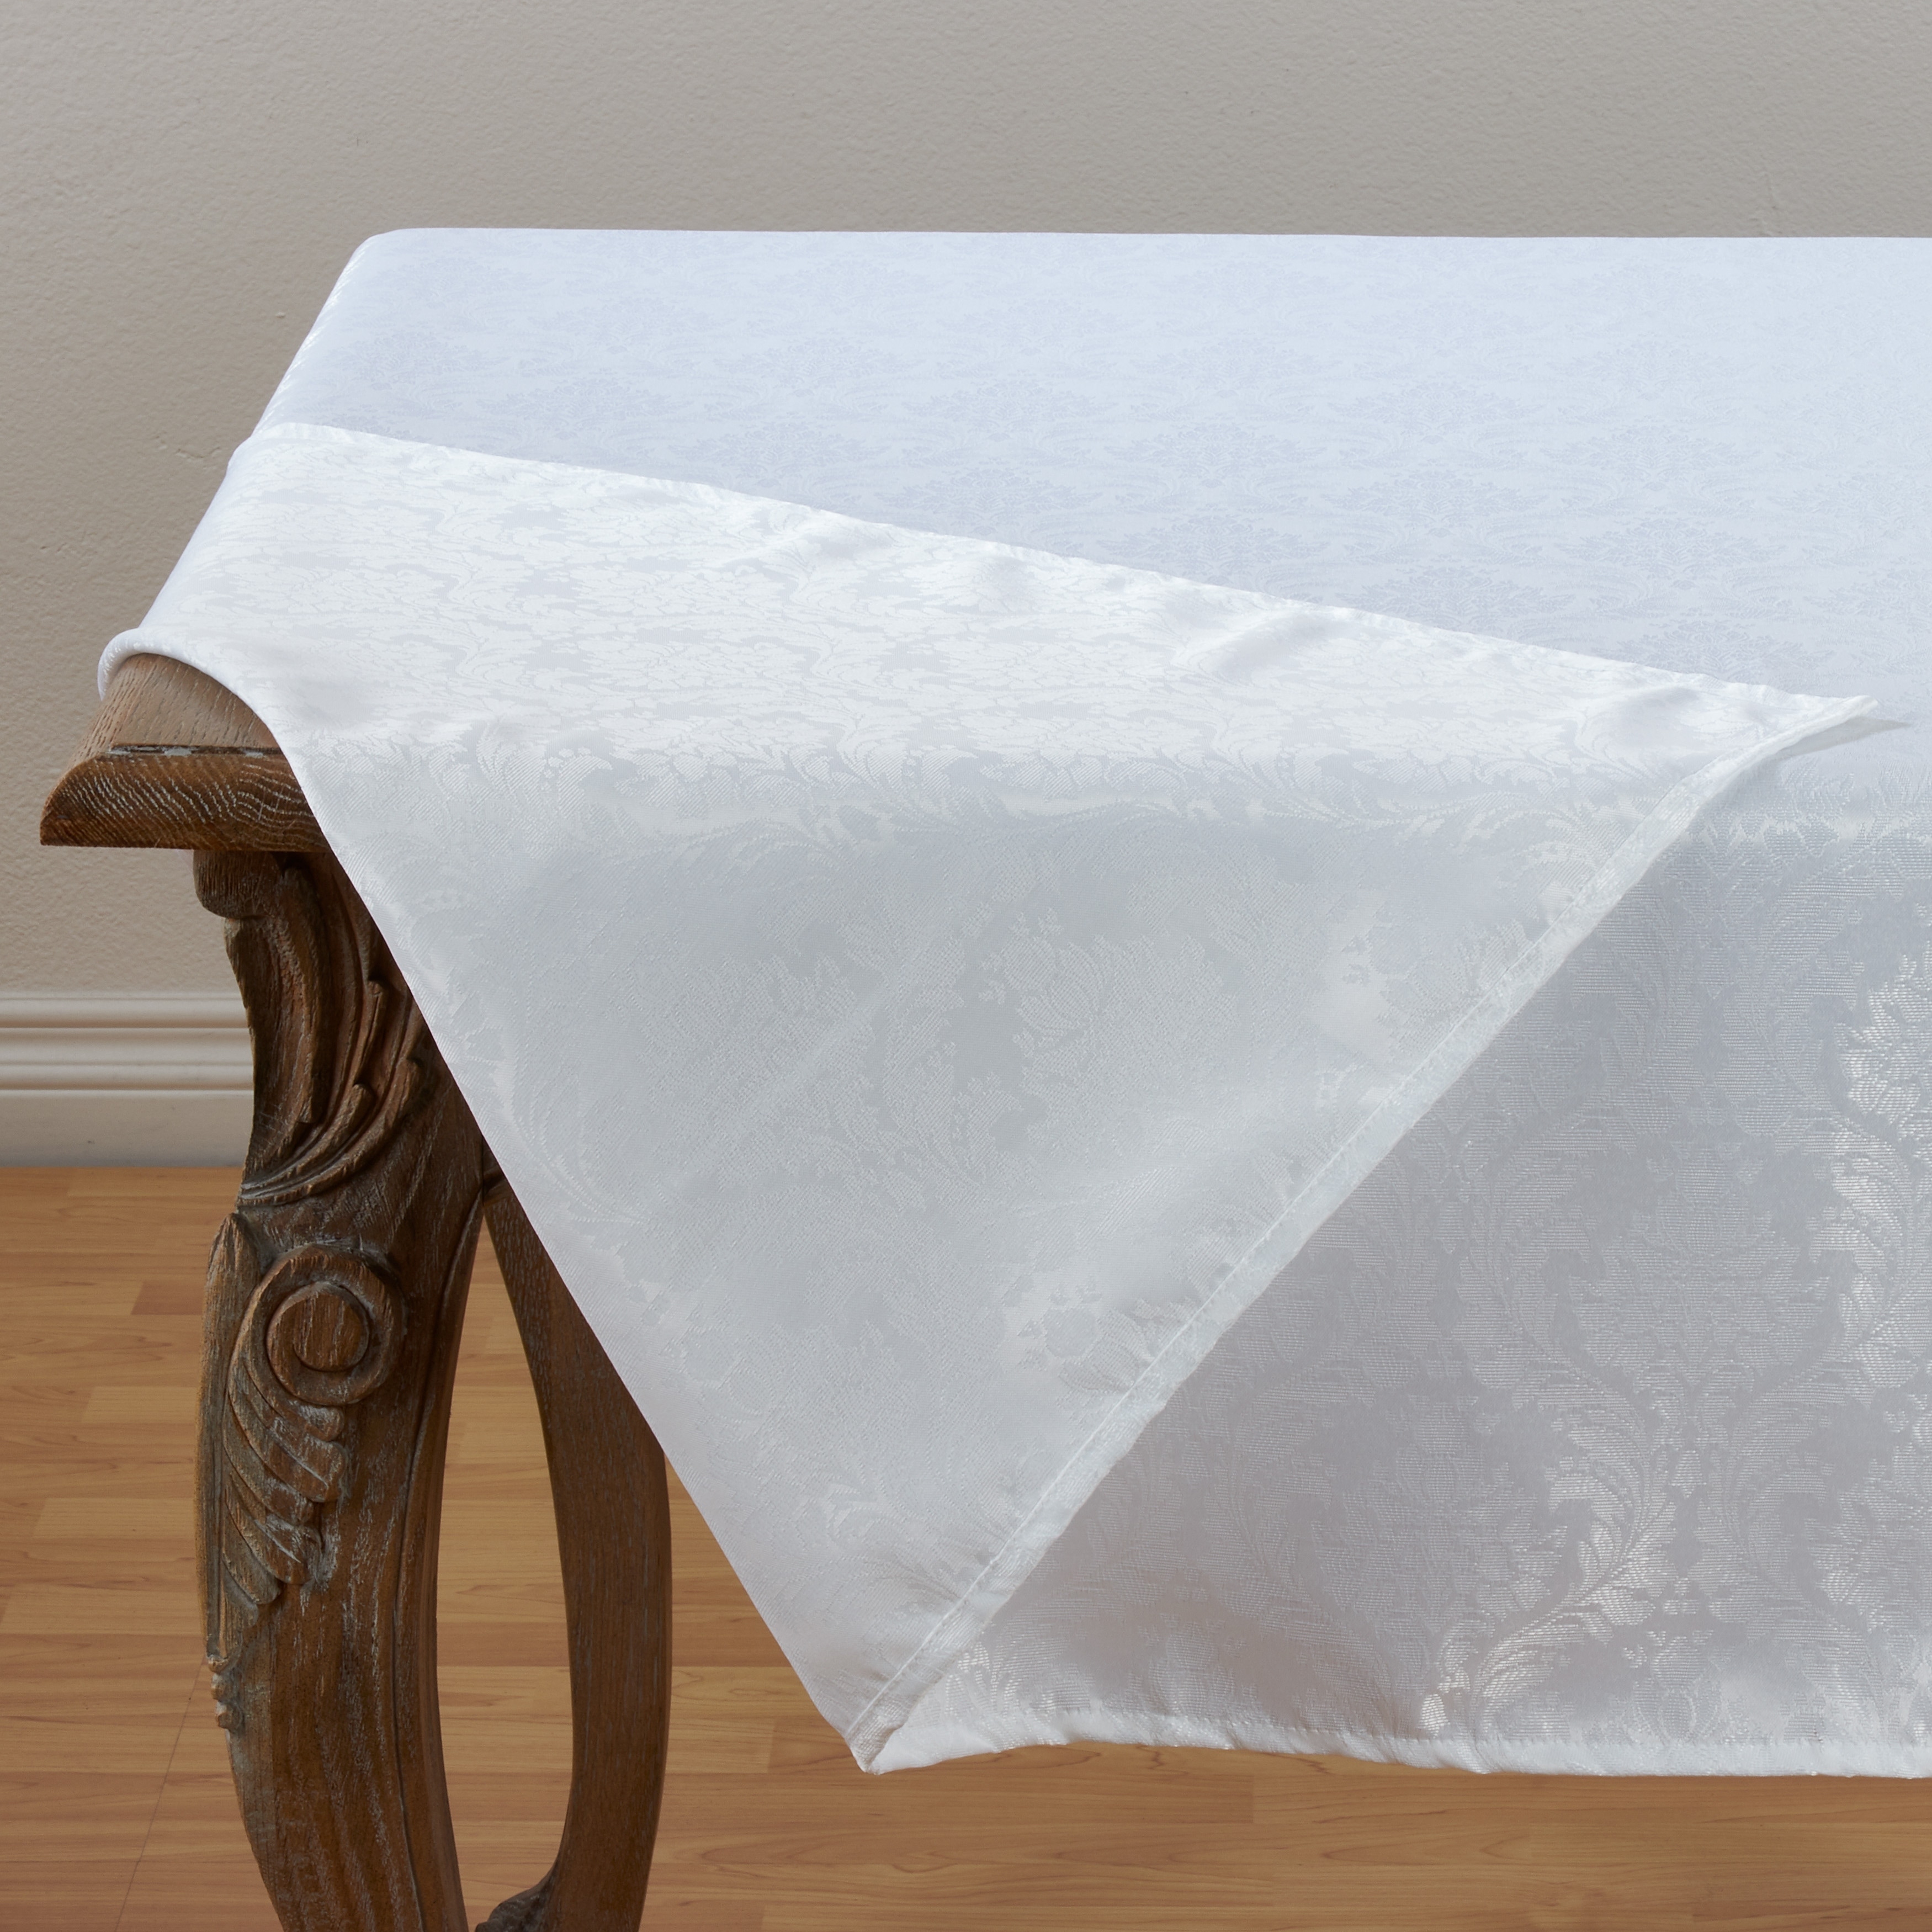 https://ak1.ostkcdn.com/images/products/22873038/White-Polyester-Tablecloth-With-Subtle-Damask-Pattern-16a76487-25d2-48bd-adfc-b378cf79beda.jpg